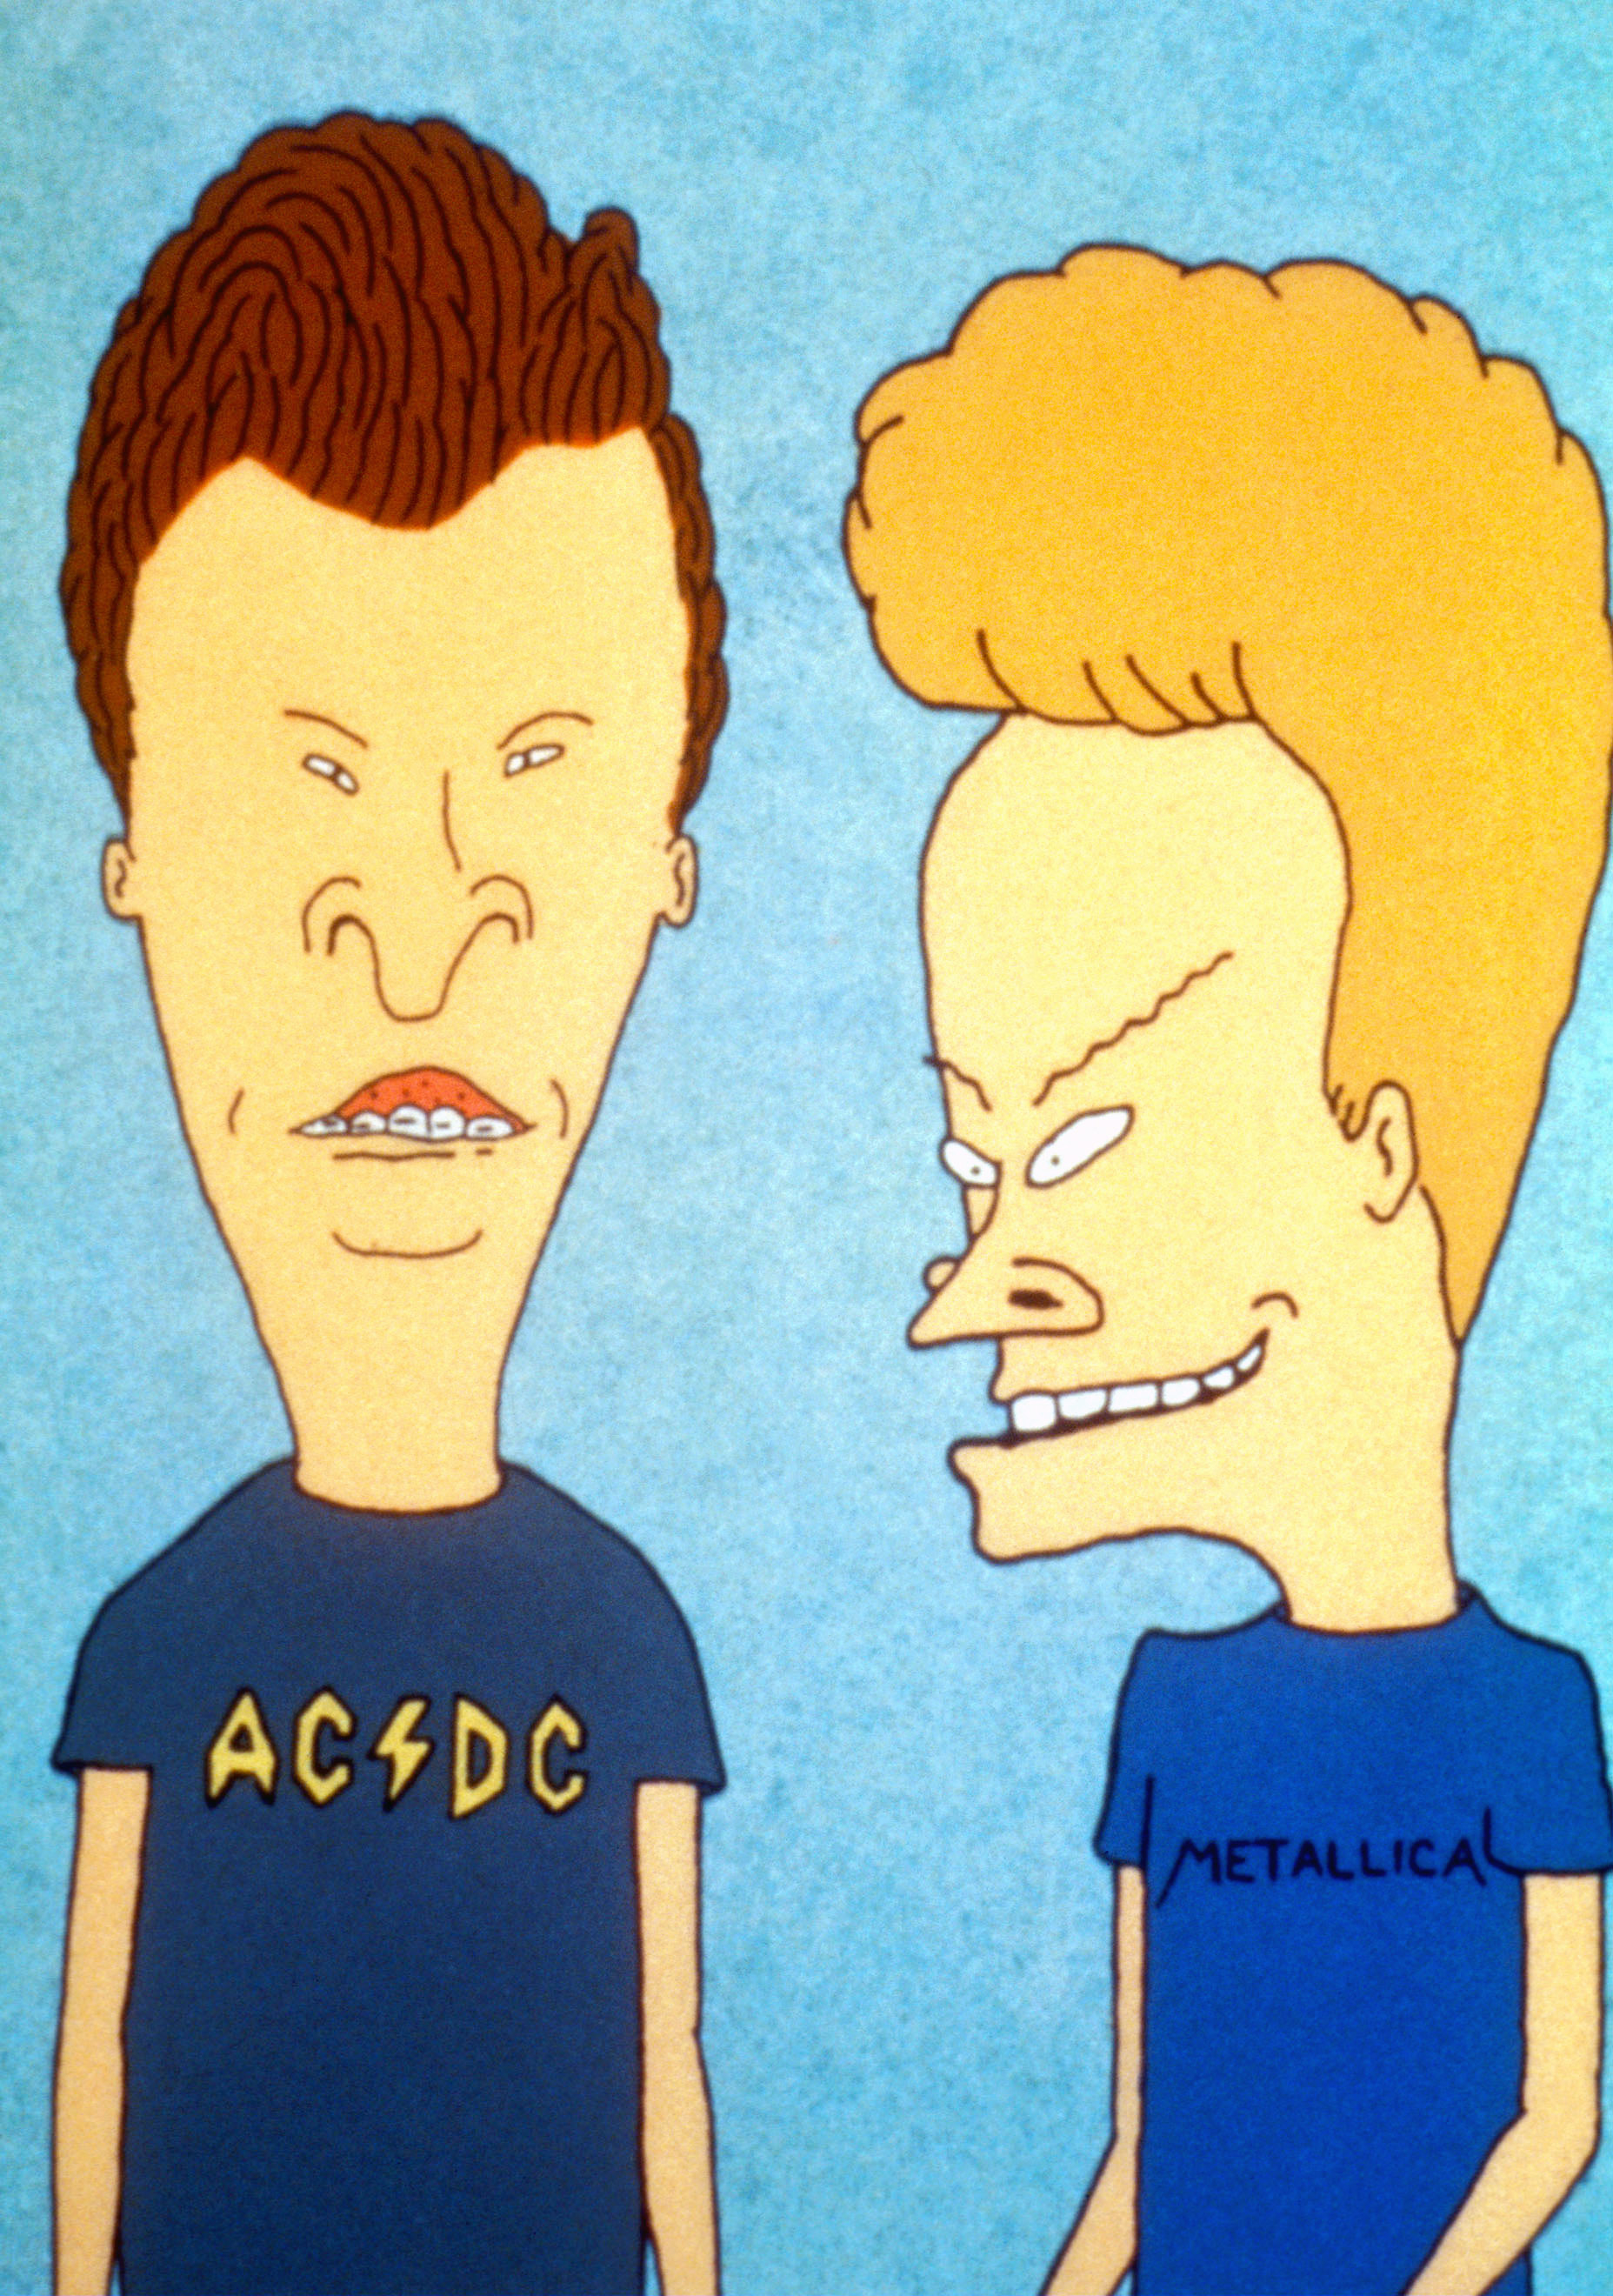 Beavis and Butt-Head in animated form, wearing band t-shirts; AC/DC for Beavis and Metallica for Butt-Head